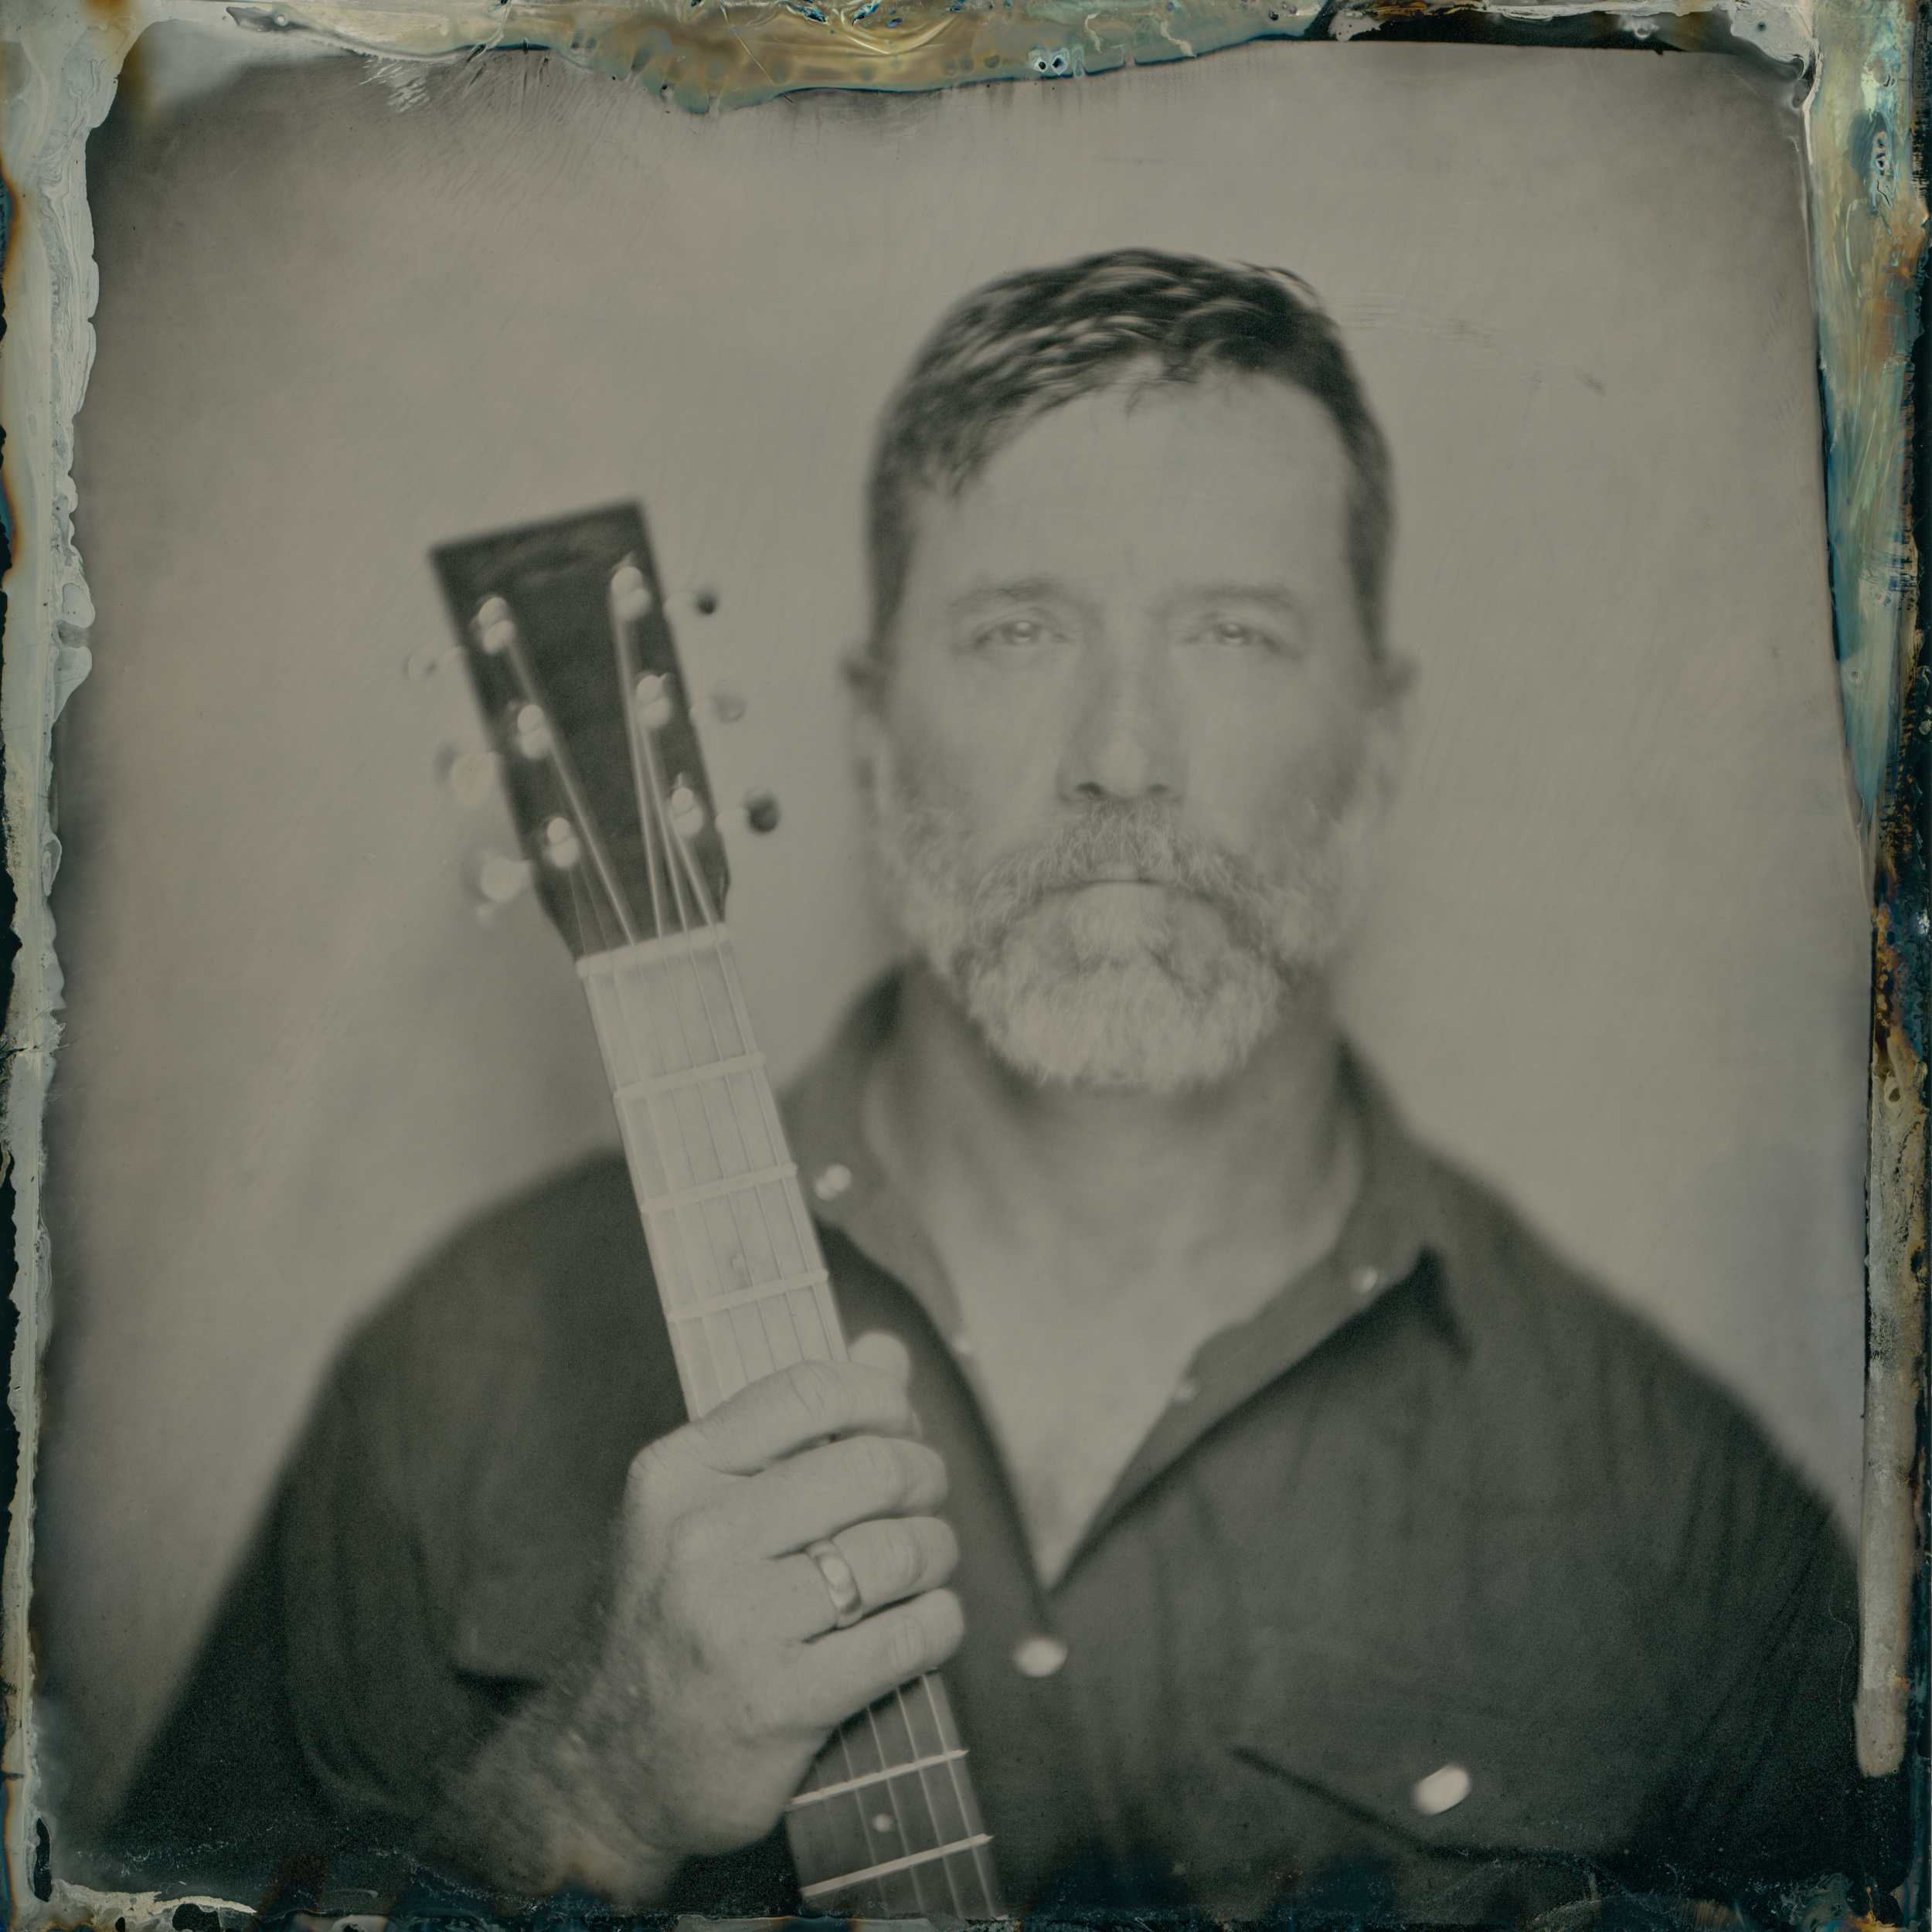 Chuck Ragan & The Camaraderie back in The Netherlands this December